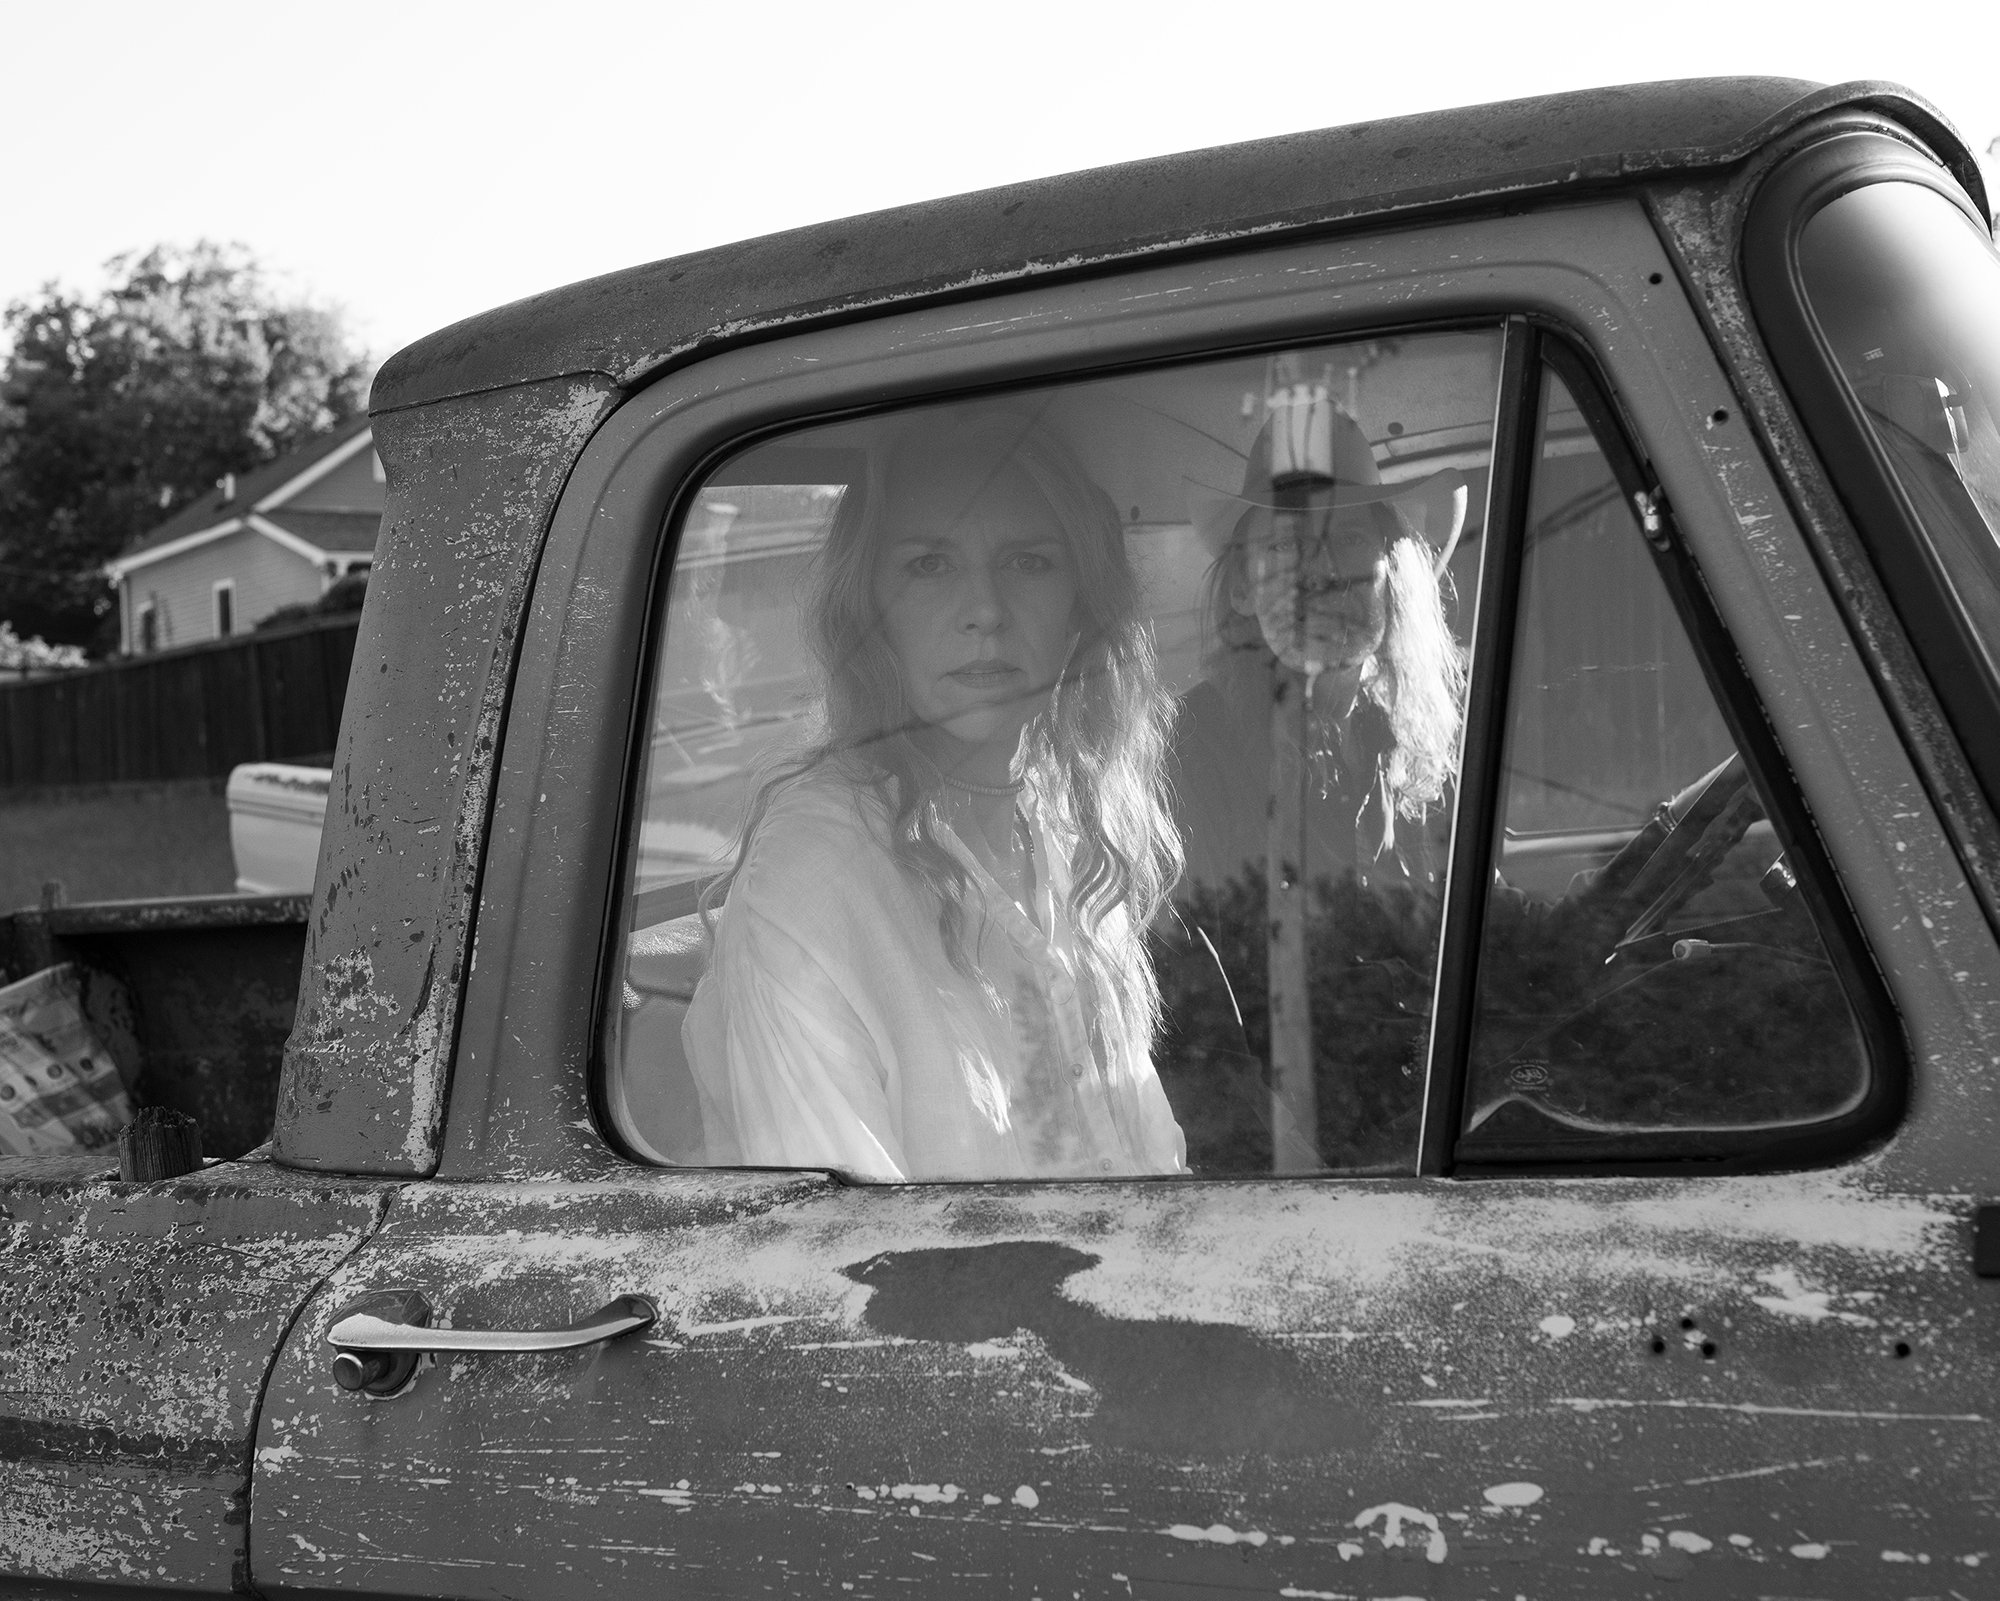 Two people looking sternly out of the side window of an old worn pickup truck.